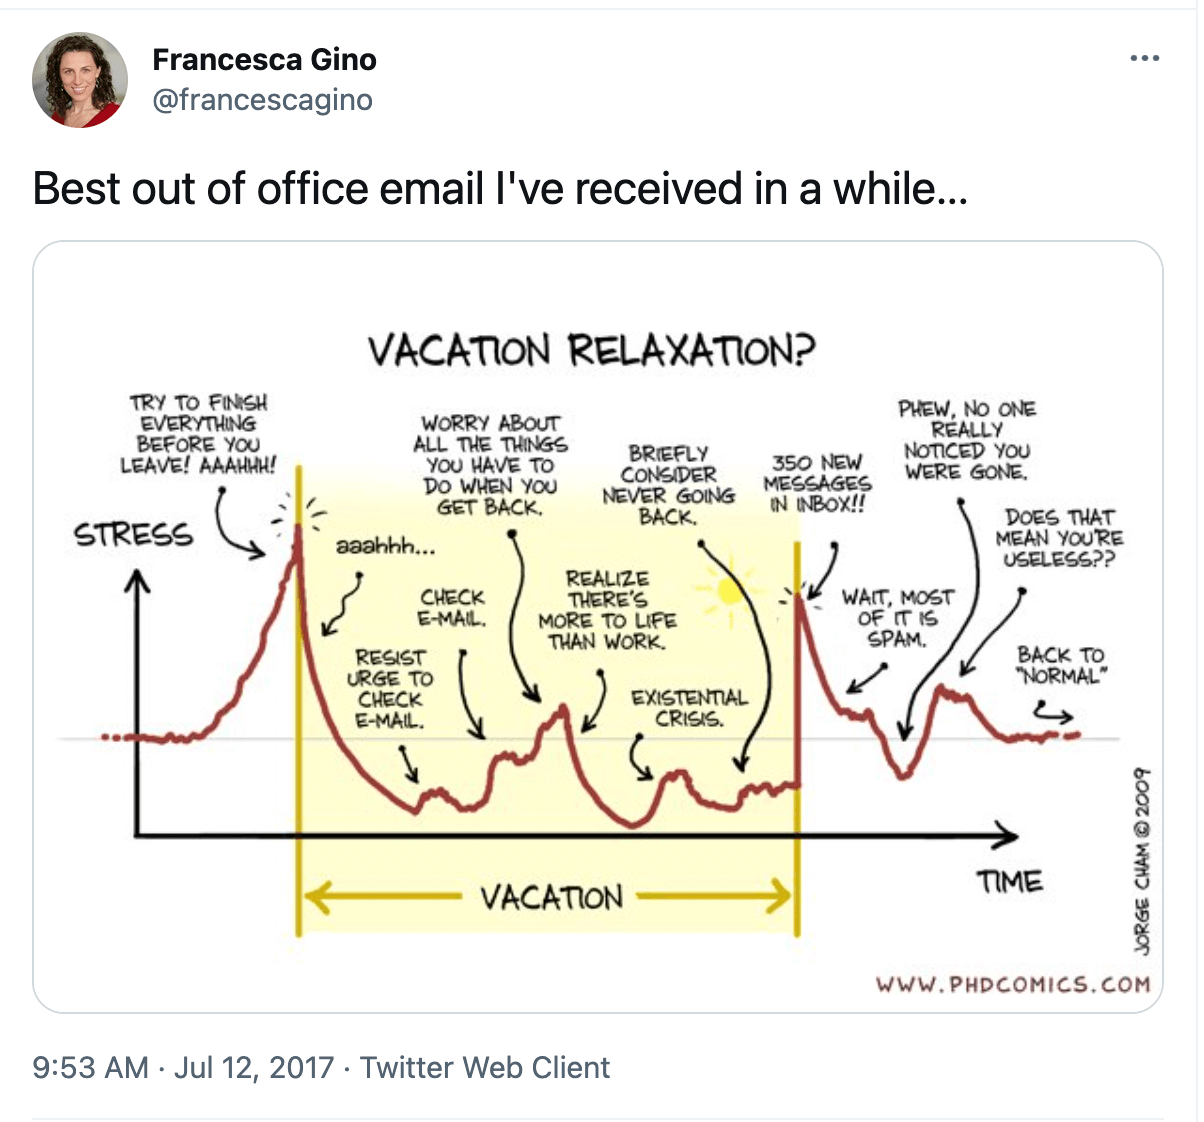 Best out of office email